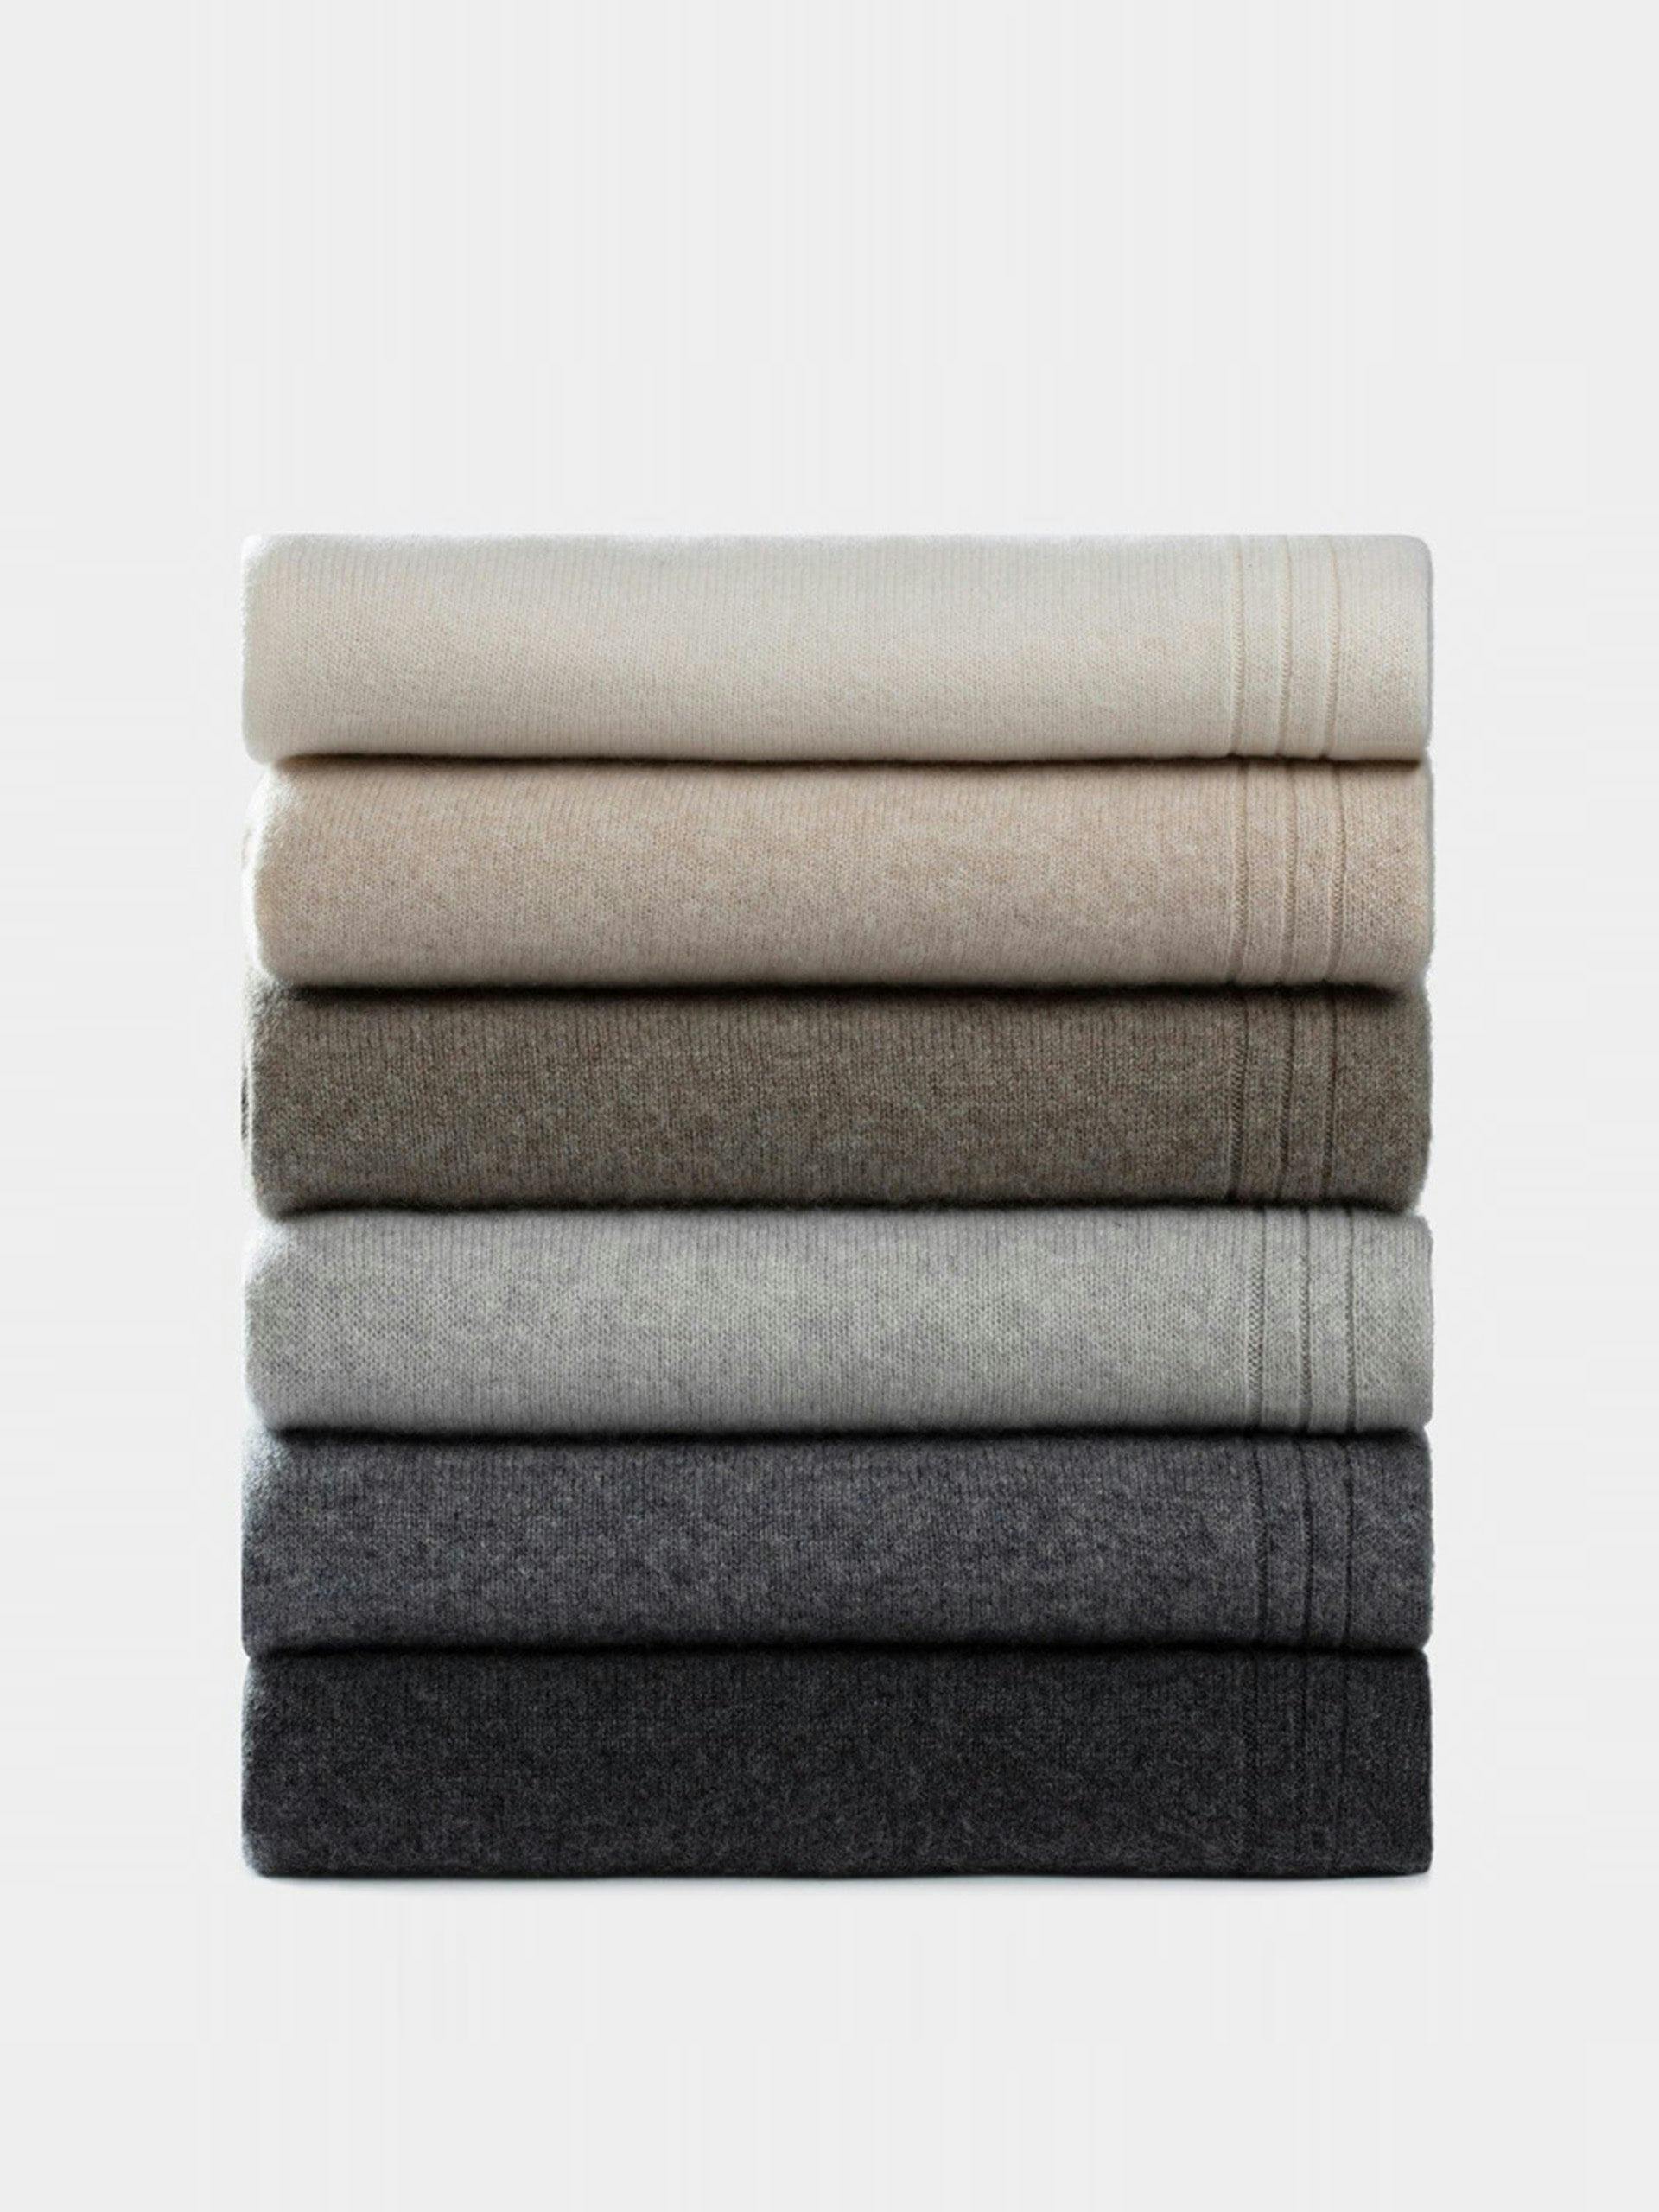 Jersey Italian cashmere throws